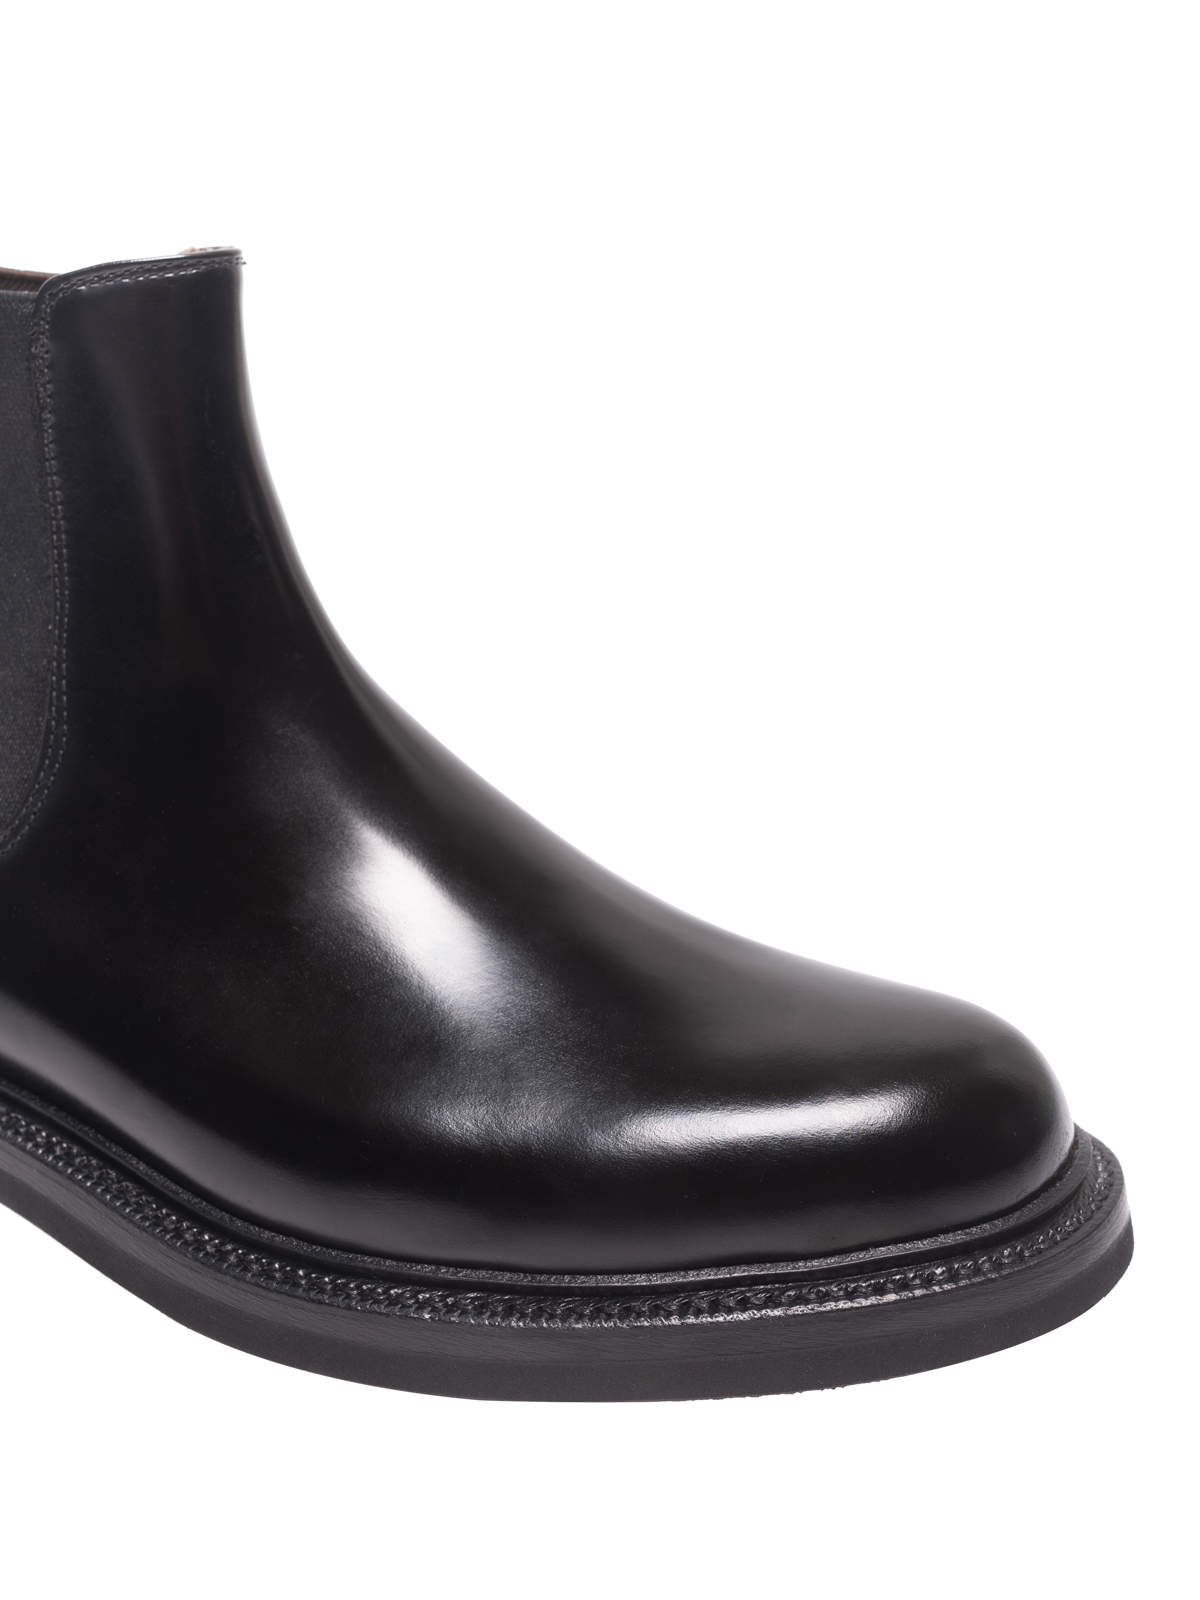 Black polished leather ankle boots 